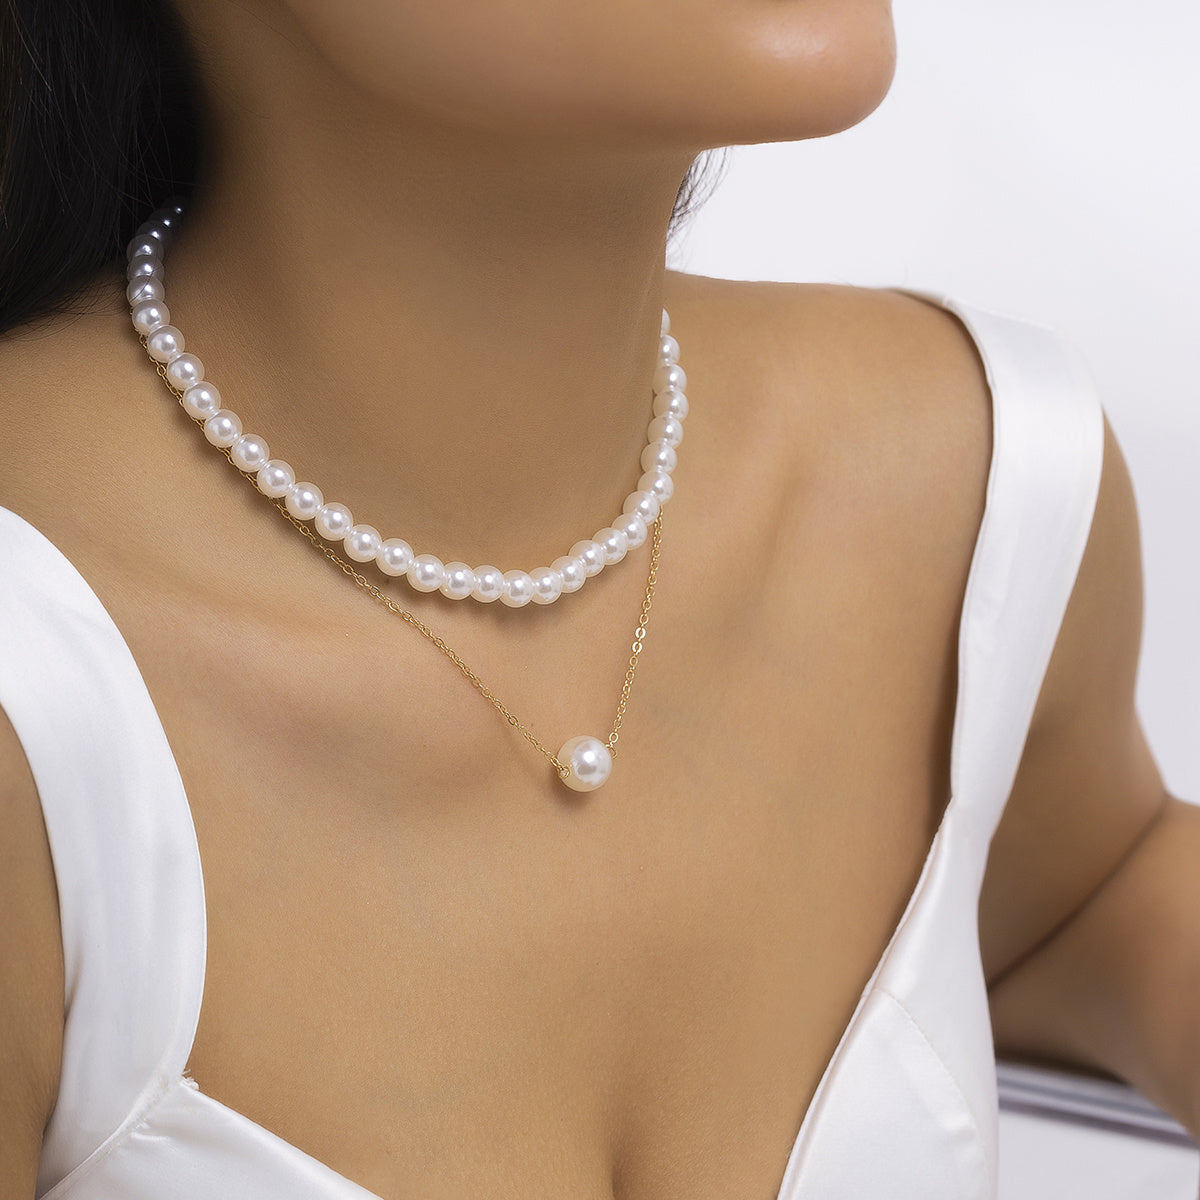 Gorgeous 2-Piece Pearl Necklace Set - Perfect for Women!